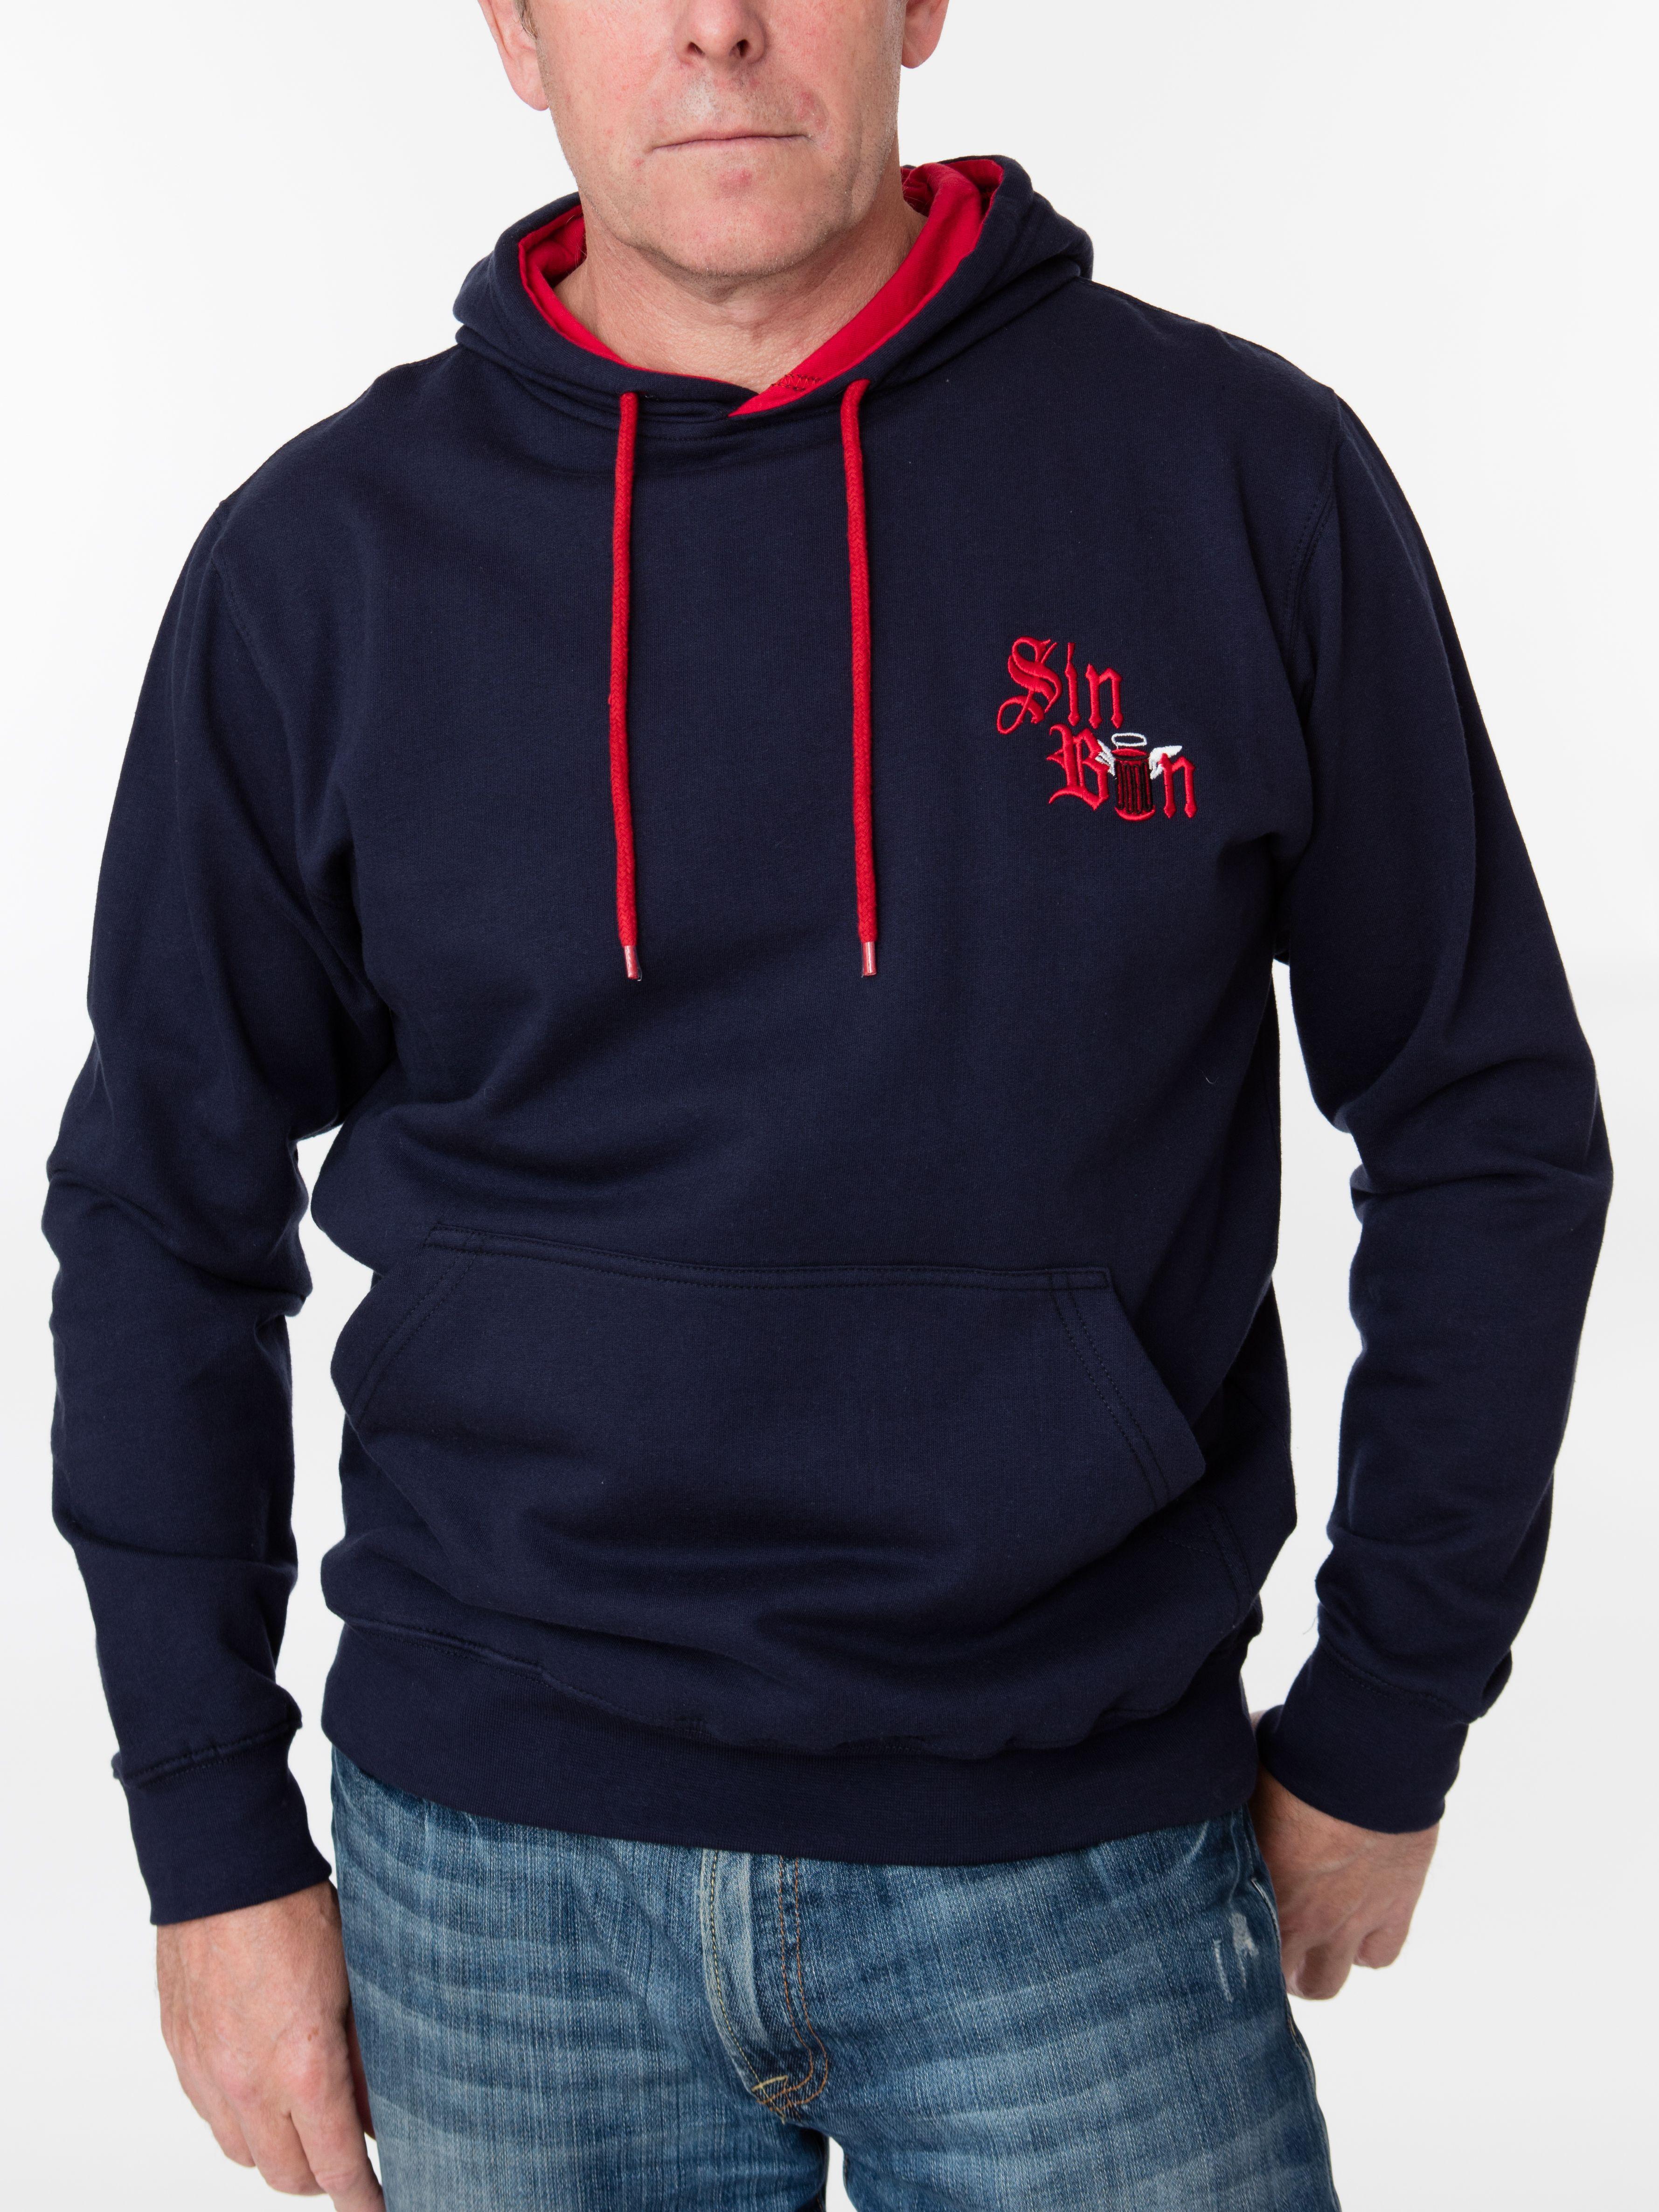 Red Clothing and Apparel Logo - Sin Bin Hooded Sweatshirt in Navy Blue with Red Logo and Detail